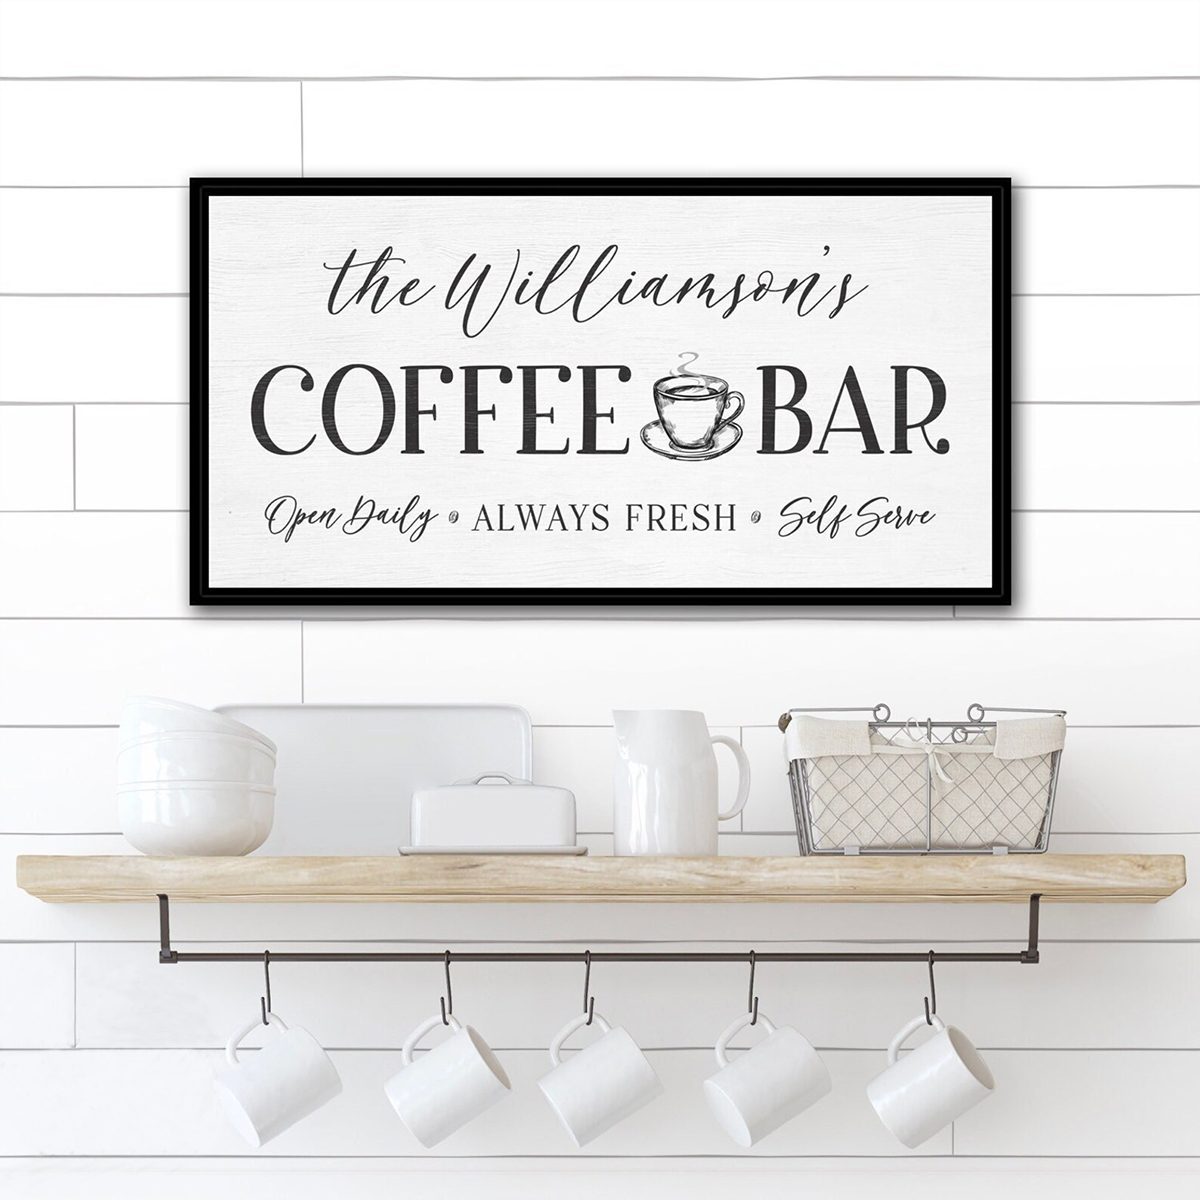 Key Essentials For Your Home Coffee Bar – The Artisan Barista